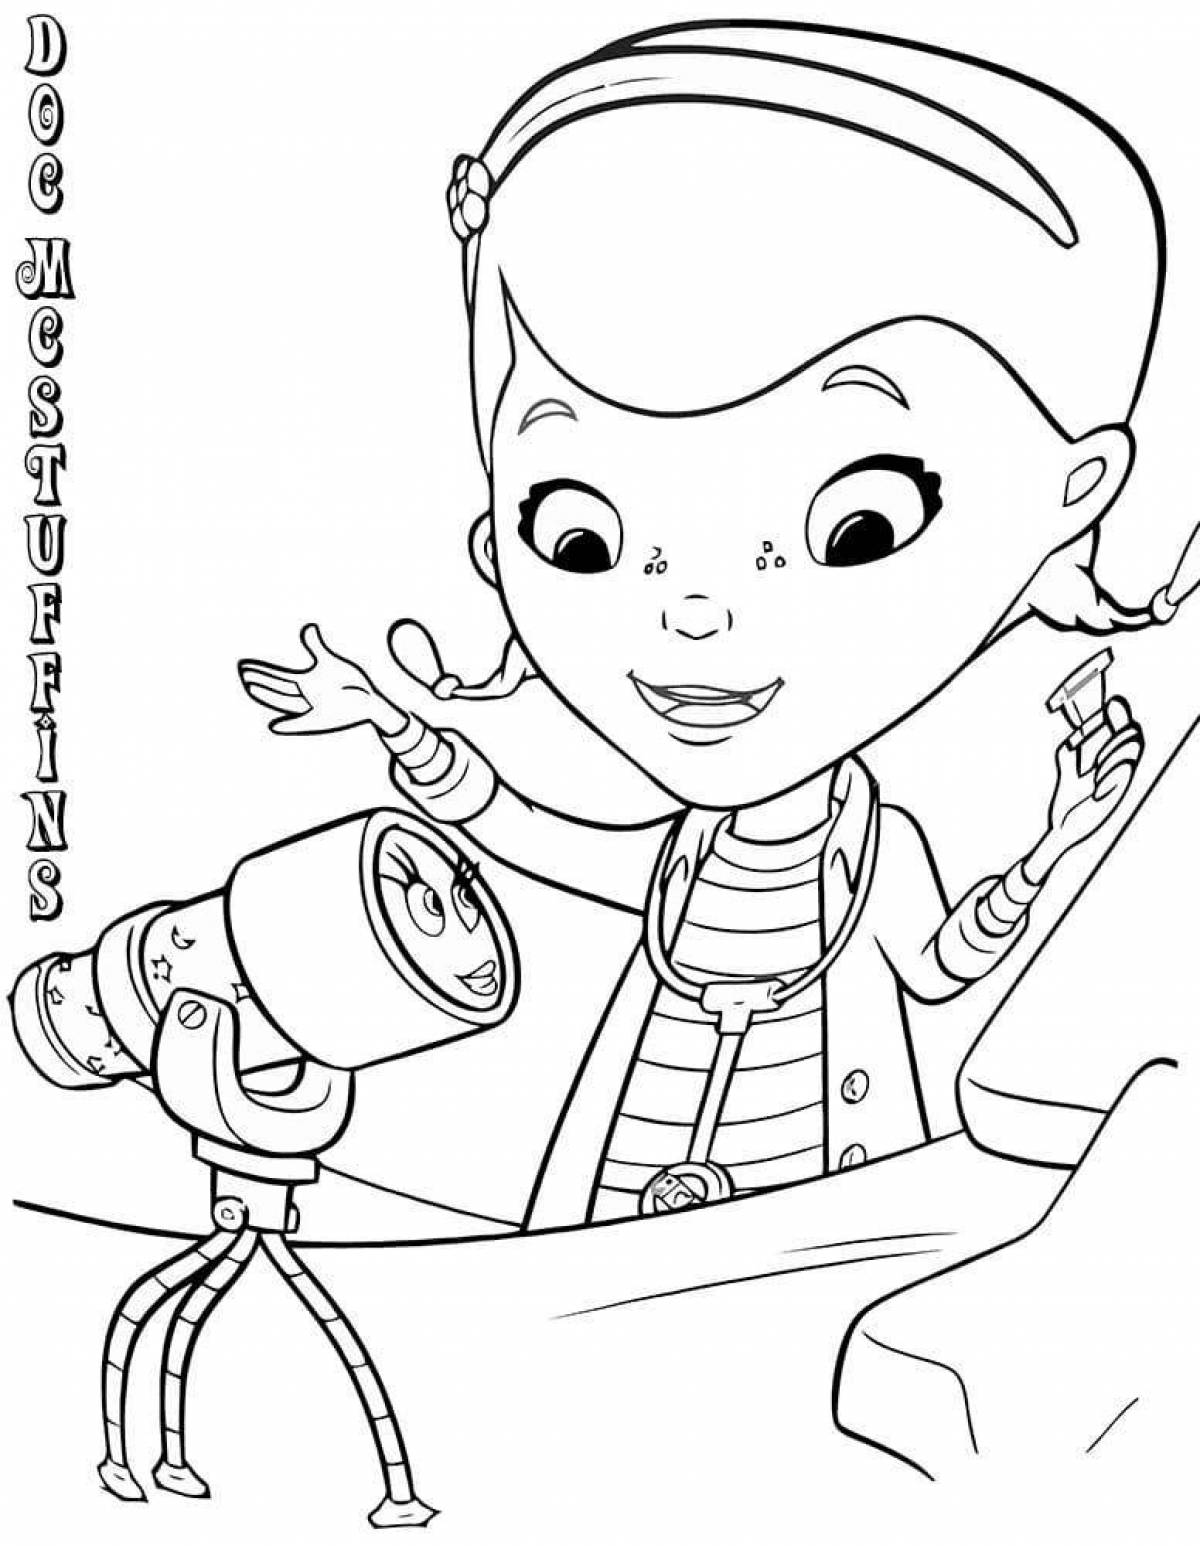 Dr Lipsey playful coloring book